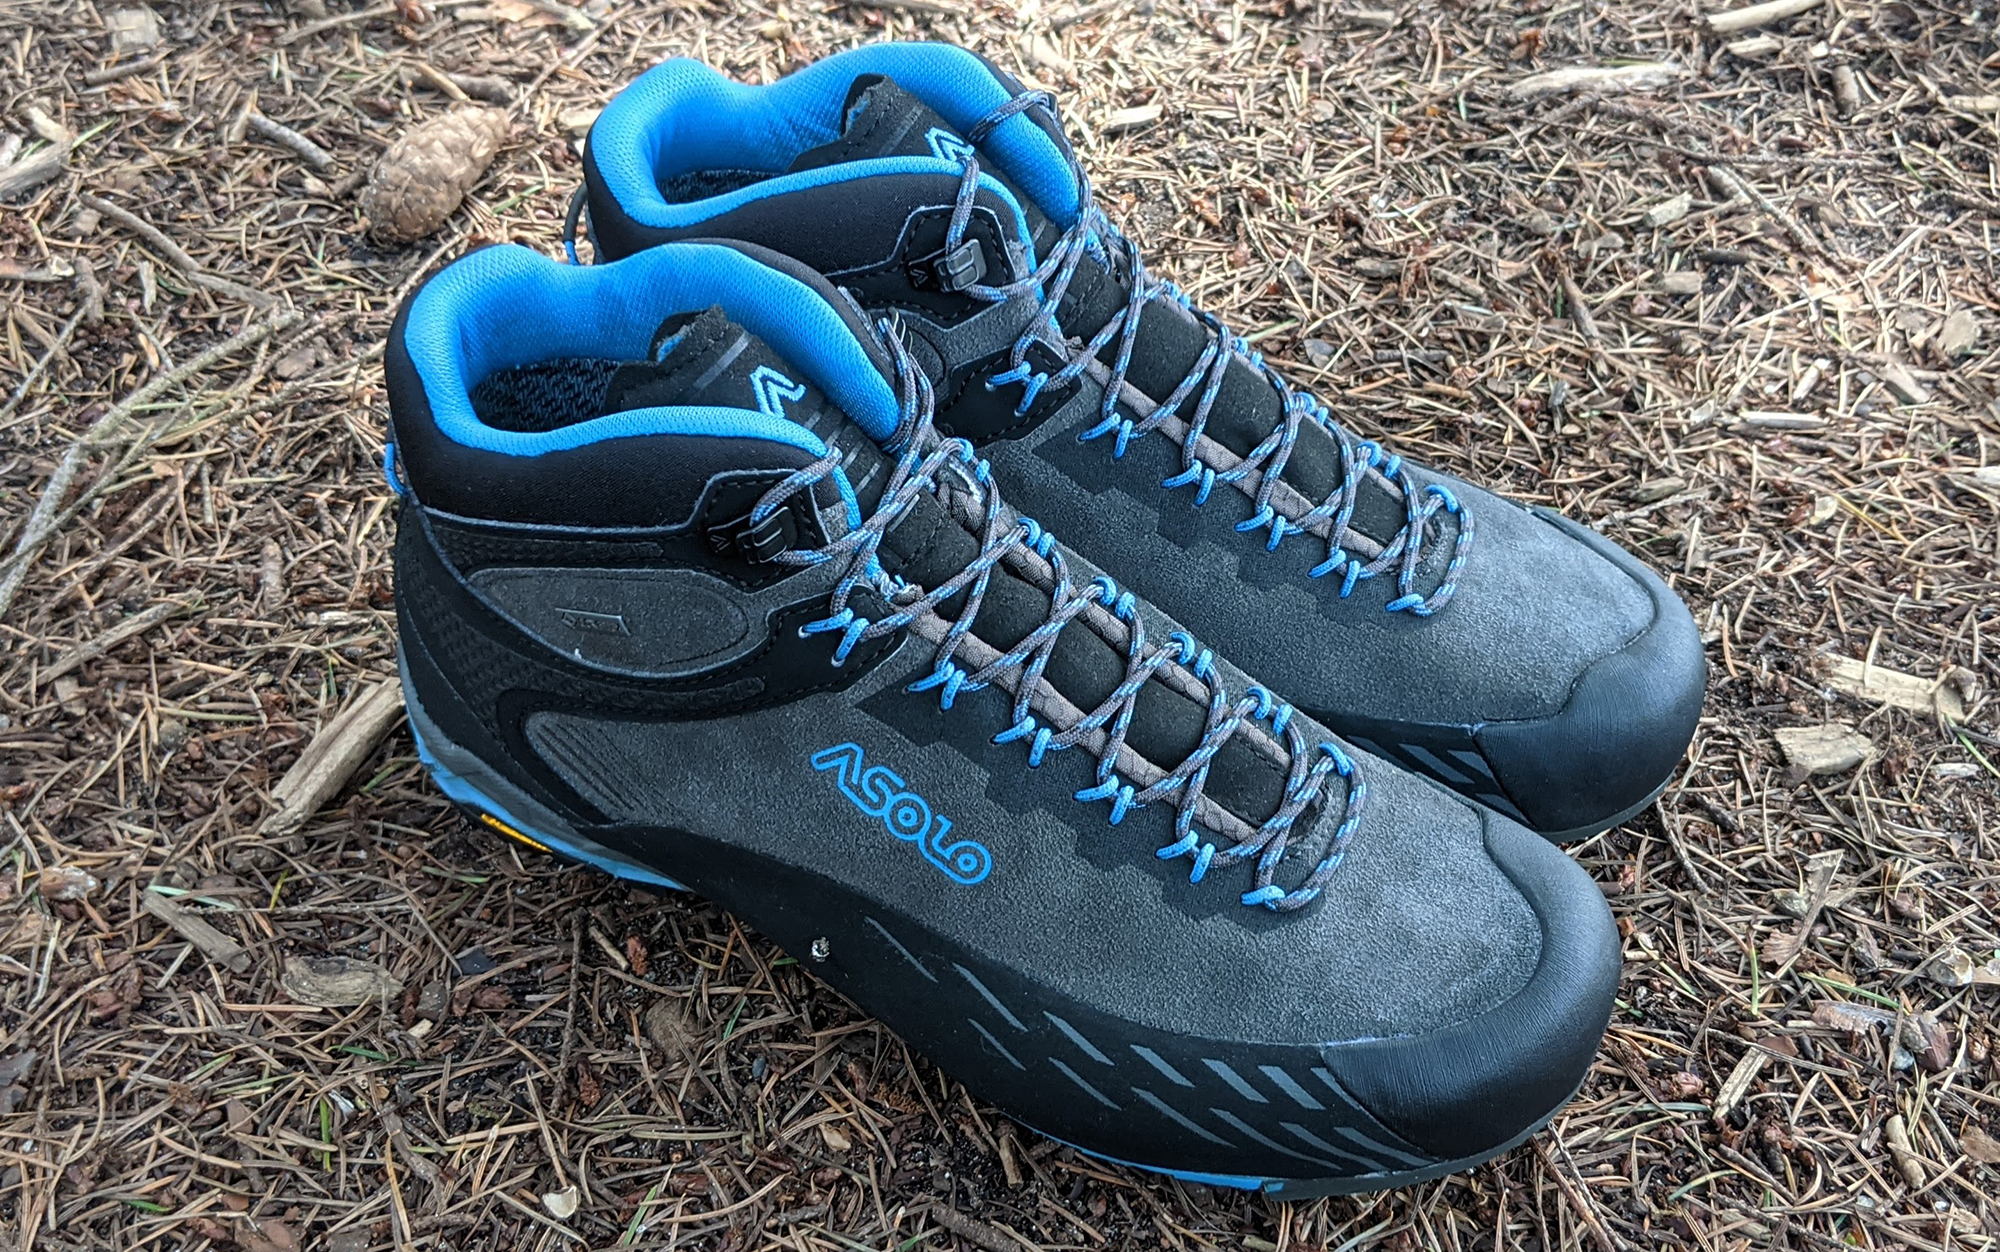 The Asolo Eldo Mid is one of the best waterproof hiking boots.